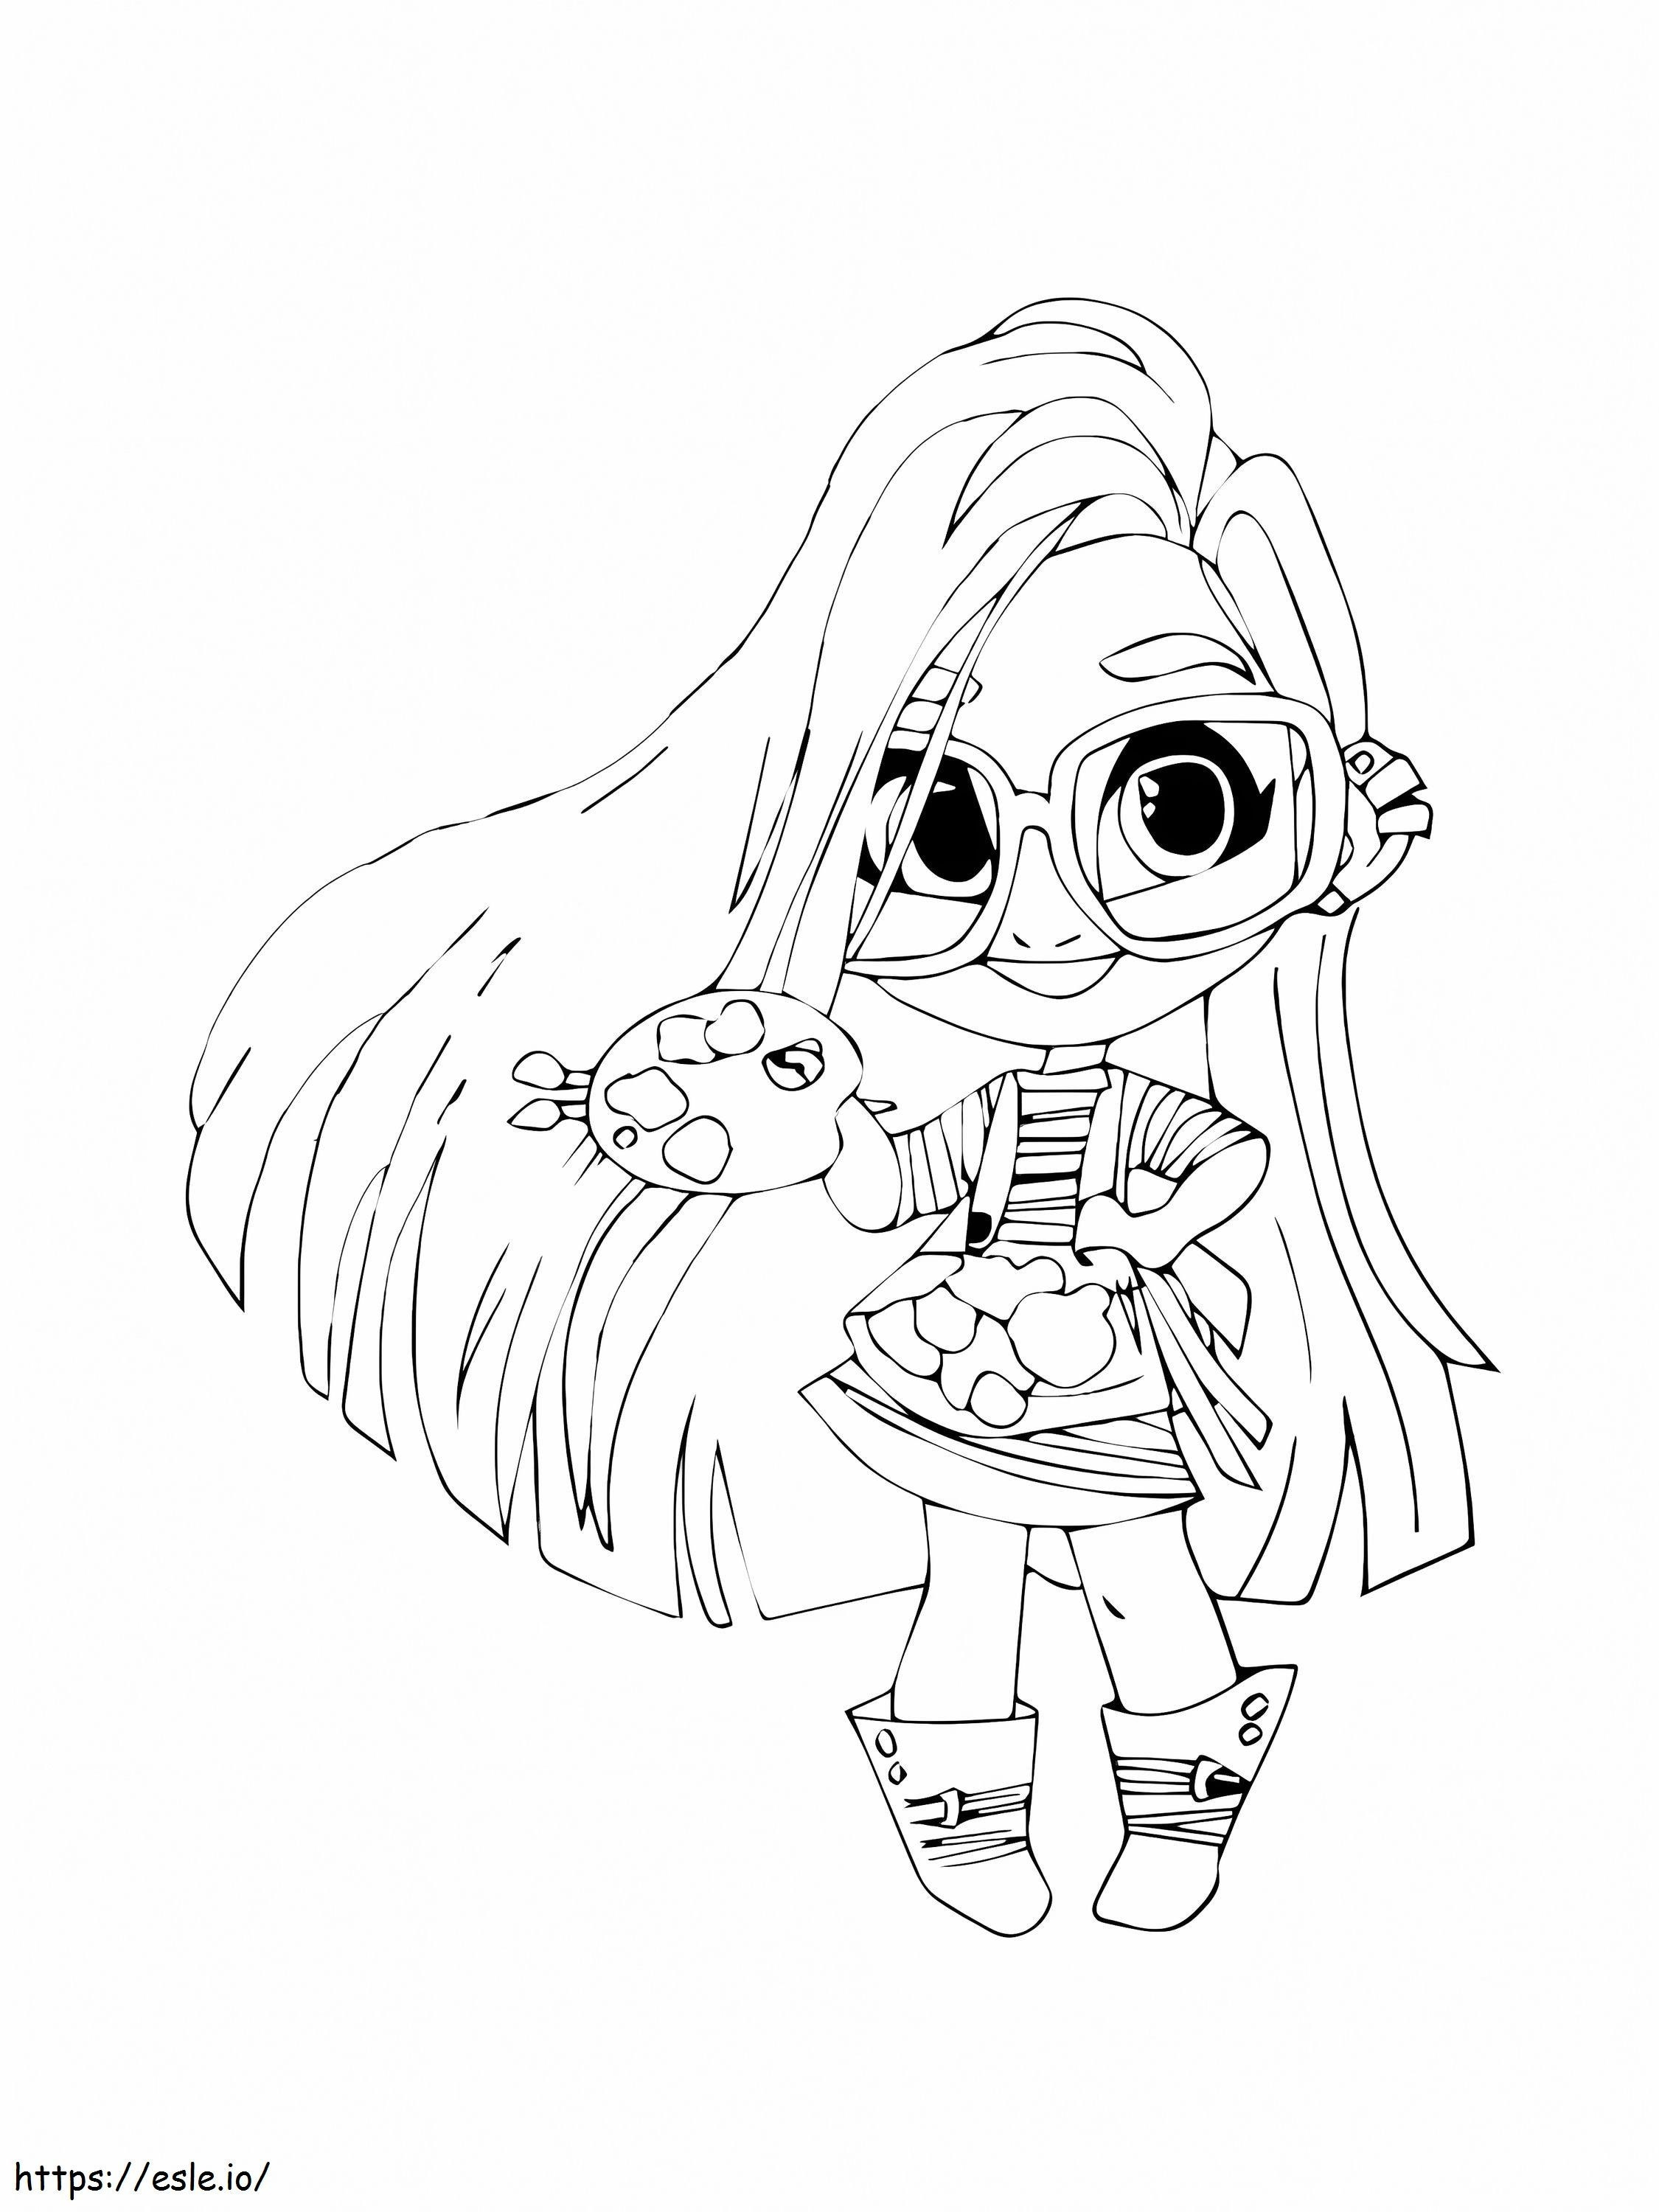 Hairdorables 2 coloring page